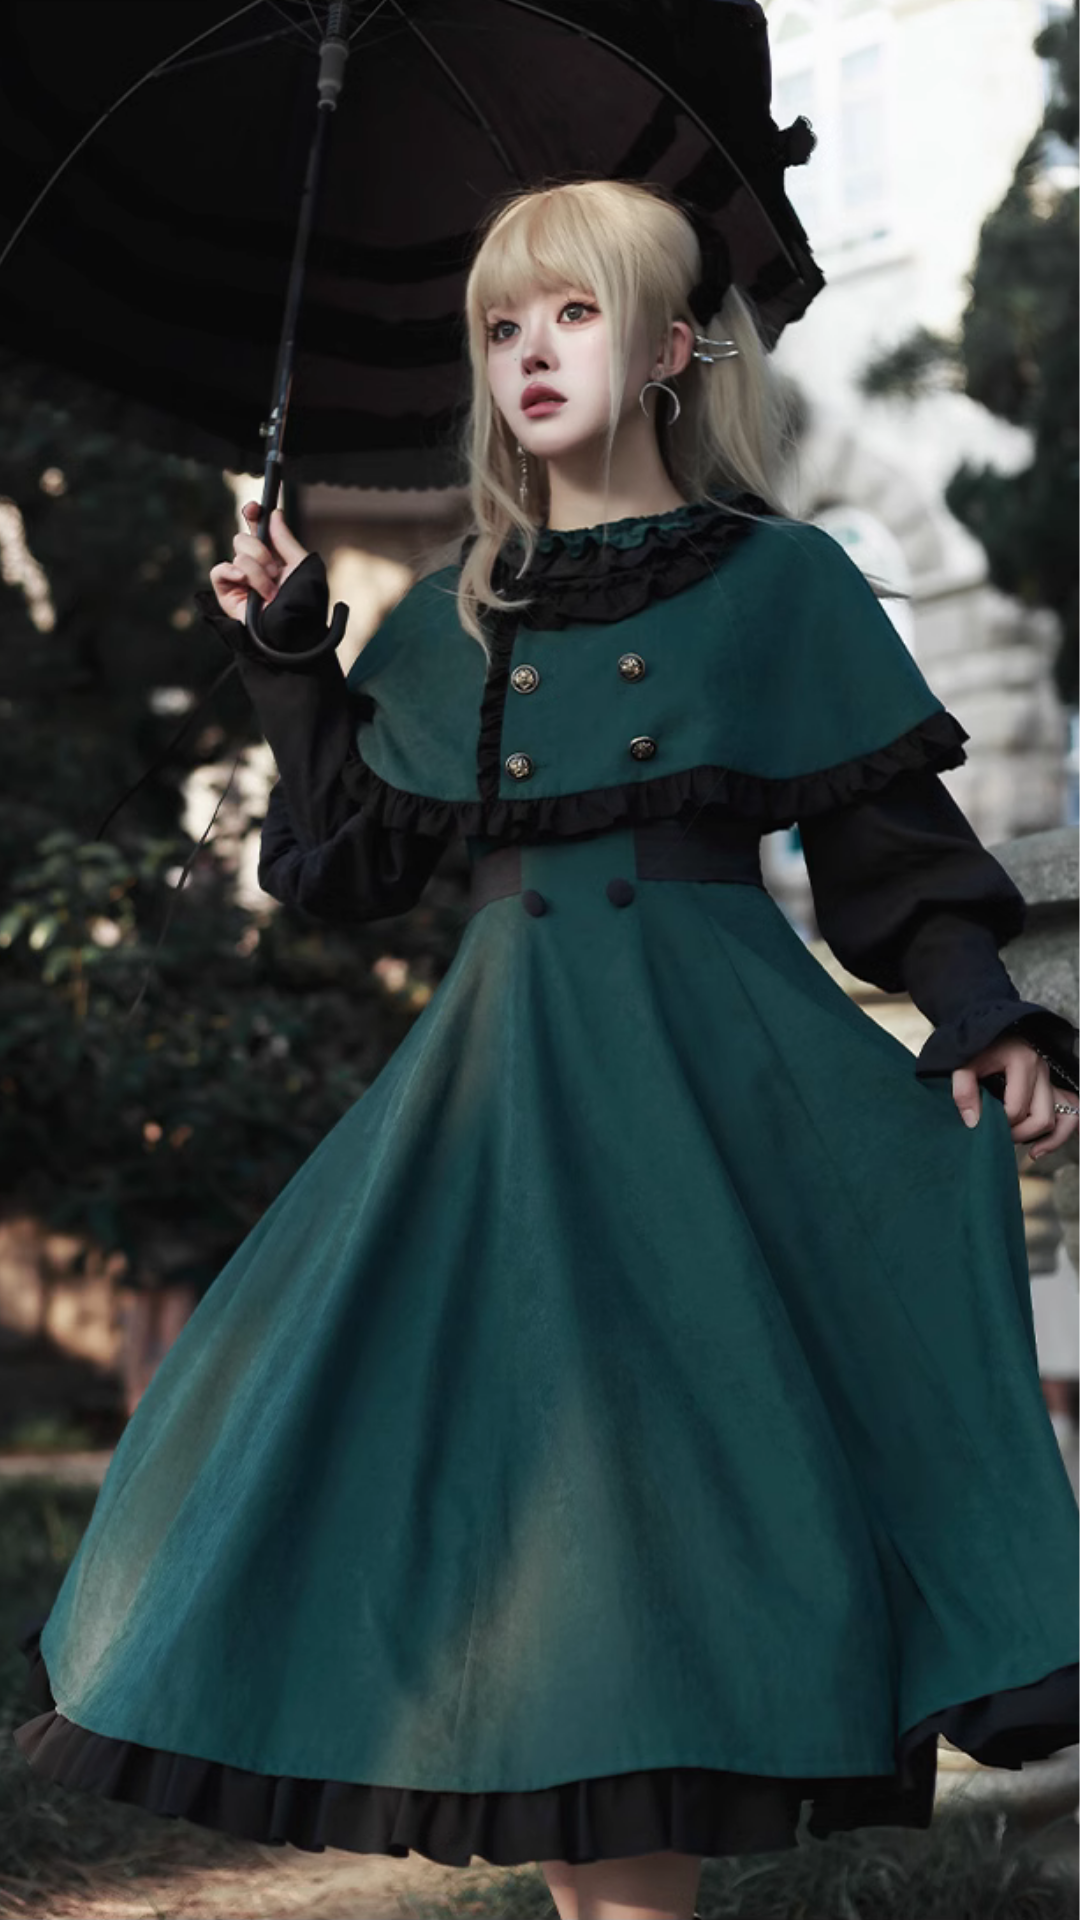 Pharmacy Apprentice Witch Long Sleeve Dress and Cape with Ribbon Tie